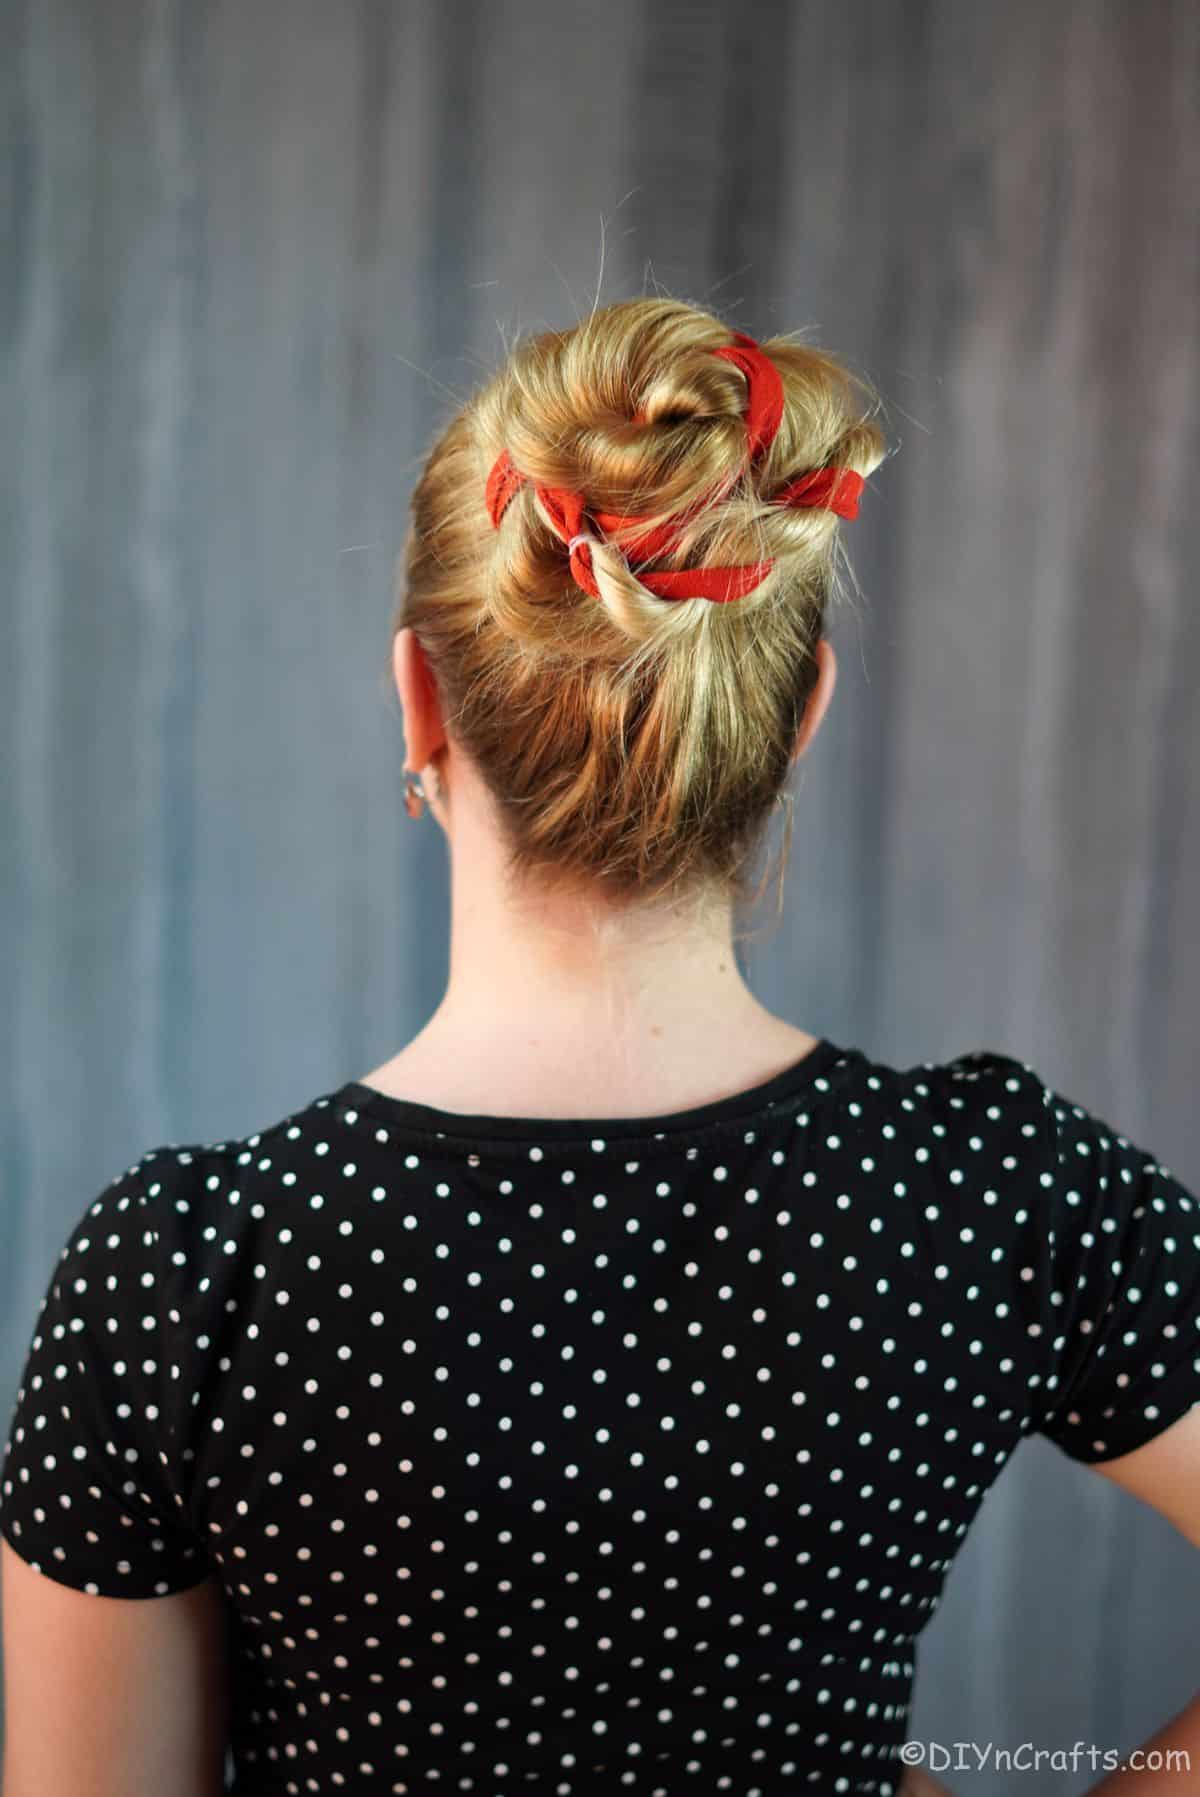 High Twisted Bun with Ribbon Hairstyle - DIY & Crafts